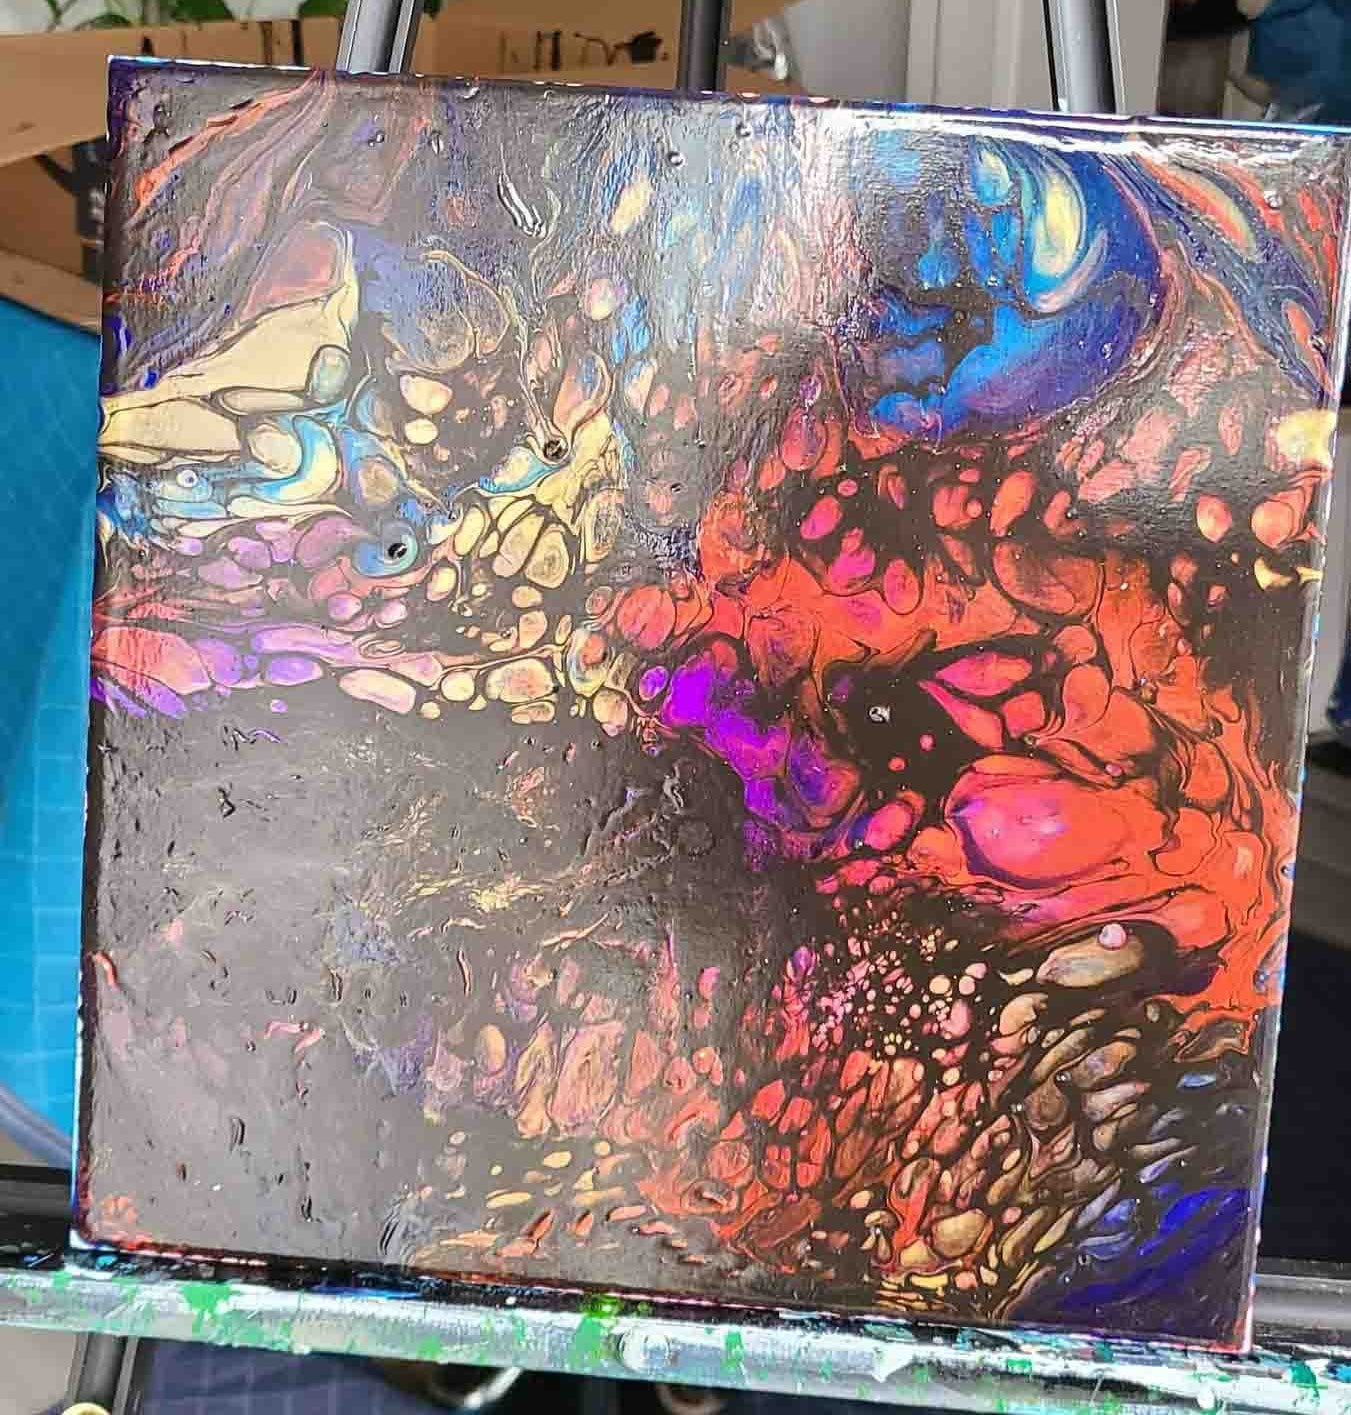 12x12 Original Abstract Canvas Art Acrylic Pour Painting "Behind the Darkness" / Original Acrylic Painting / Abstract Painting / Fluid Art